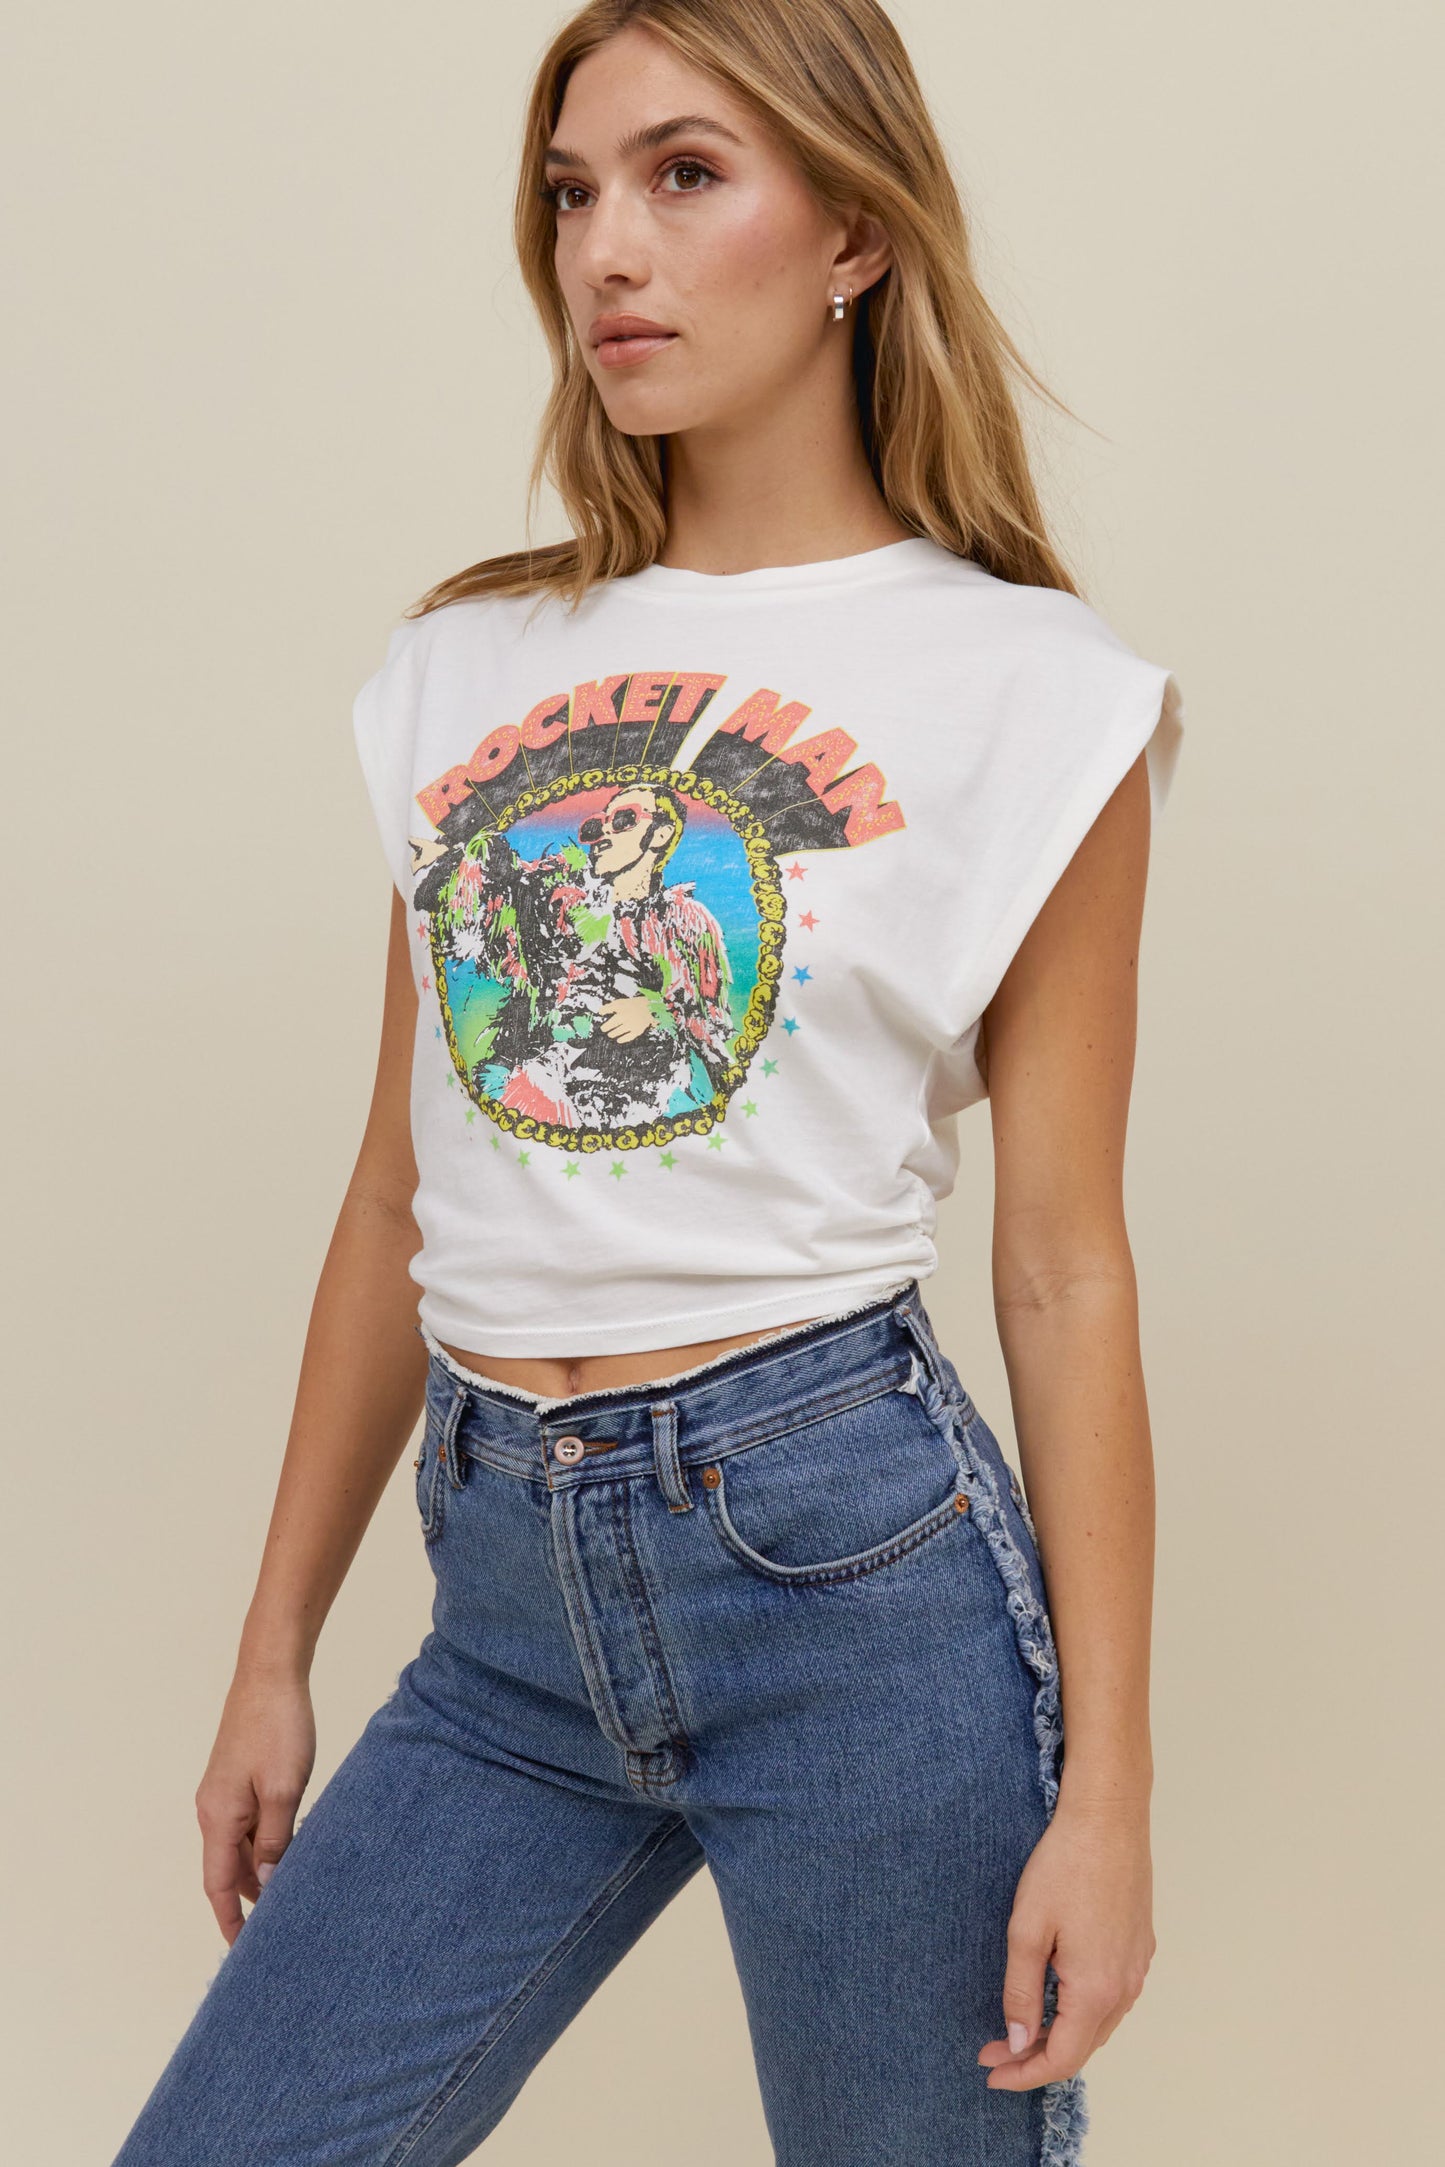 high waisted denim jeans and rocket man tee